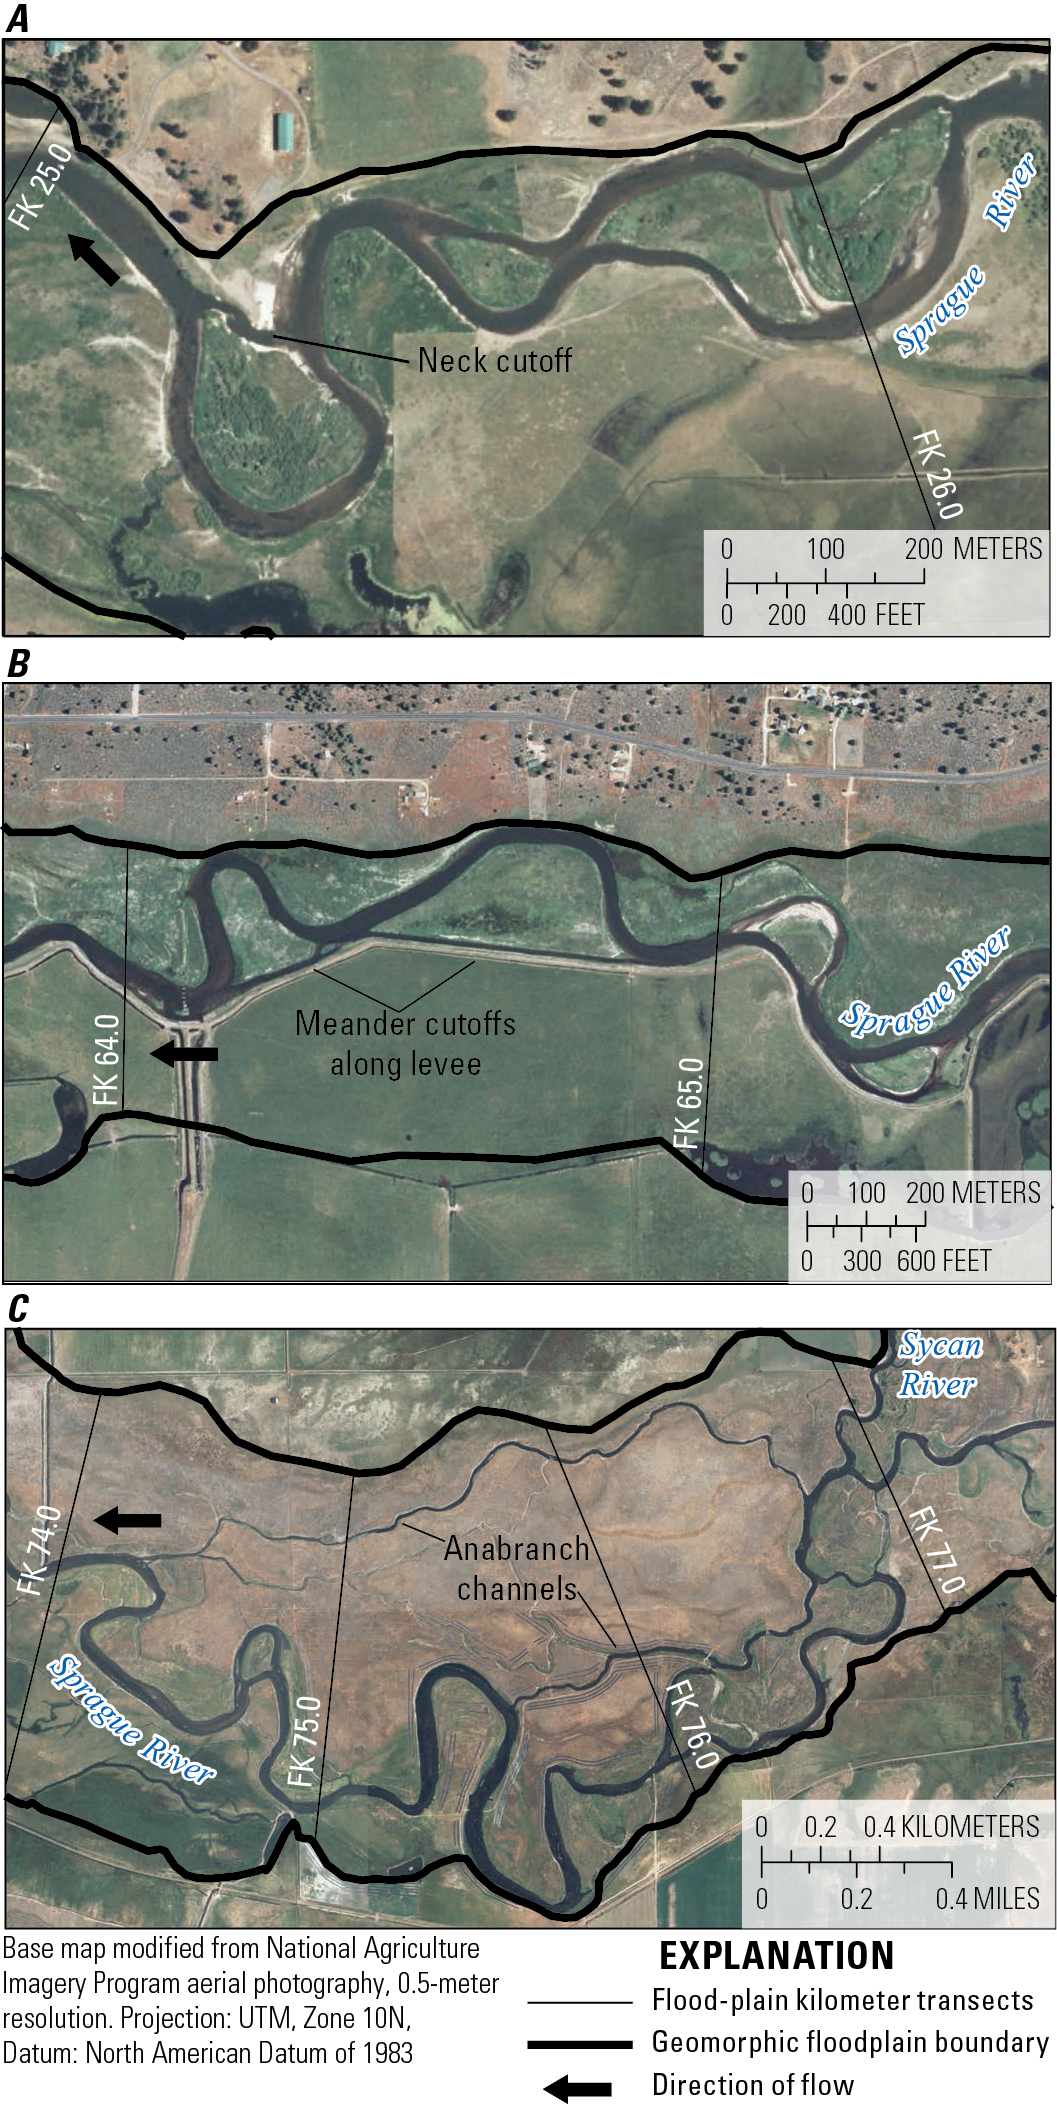 Examples of meander cutoffs, avulsions, and anabranches